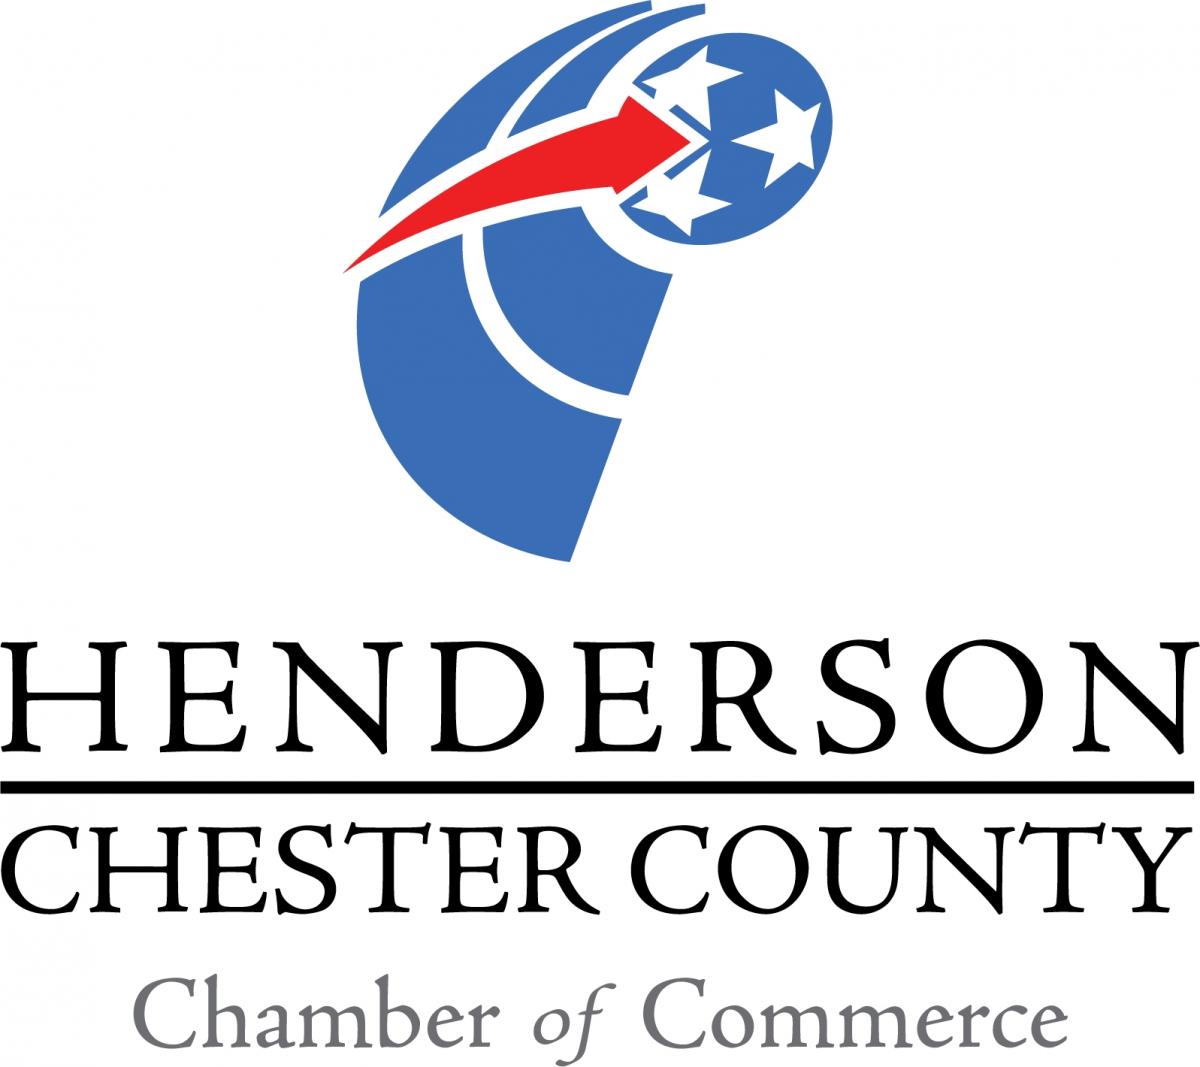 Henderson|Chester County Chamber